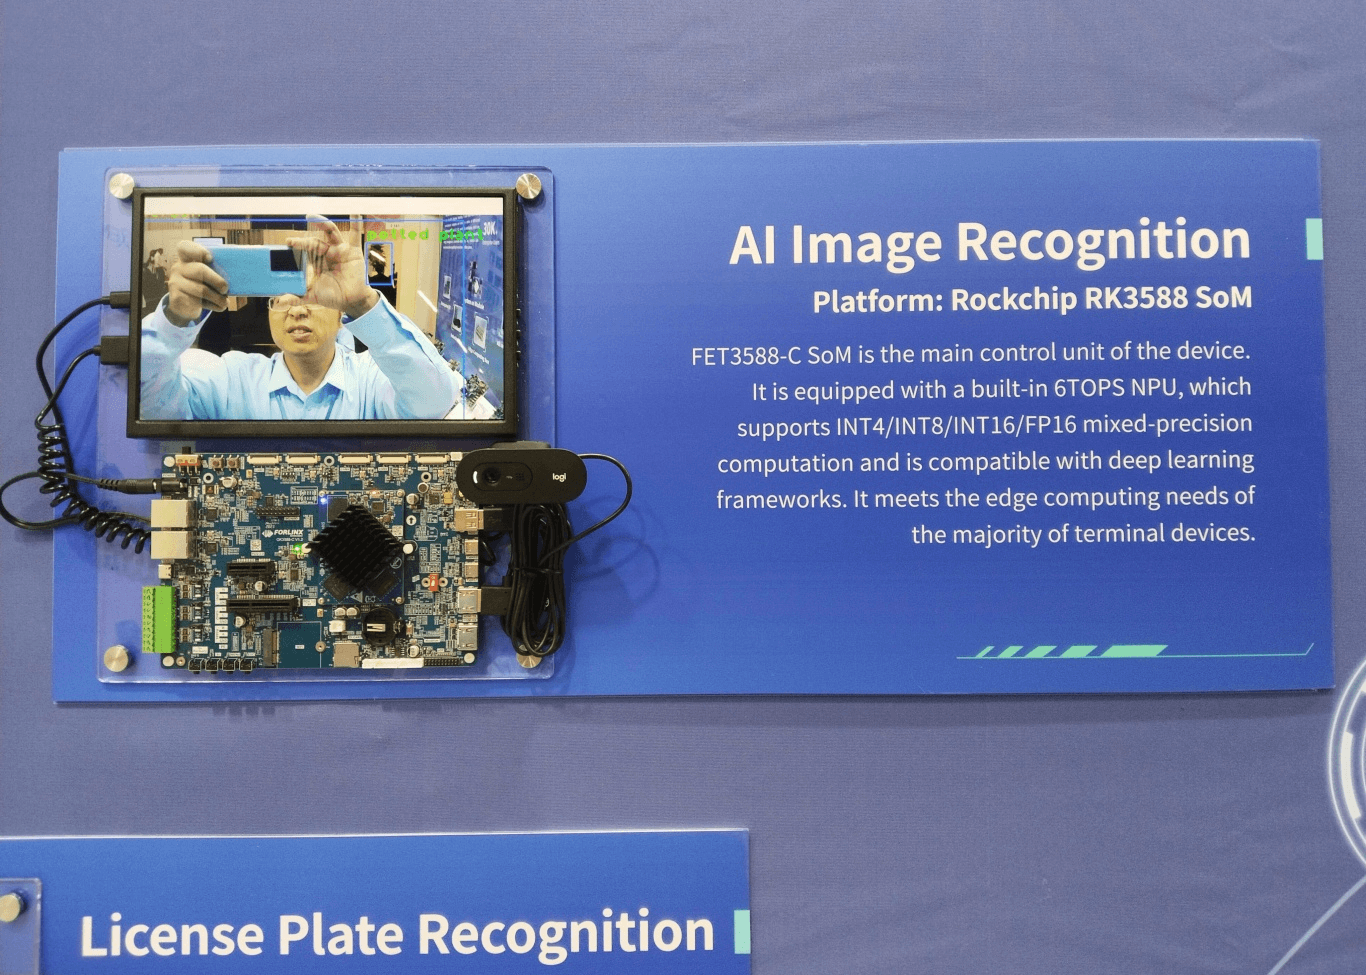 AI Image Recognition Demo built on the FET3588-C SoM